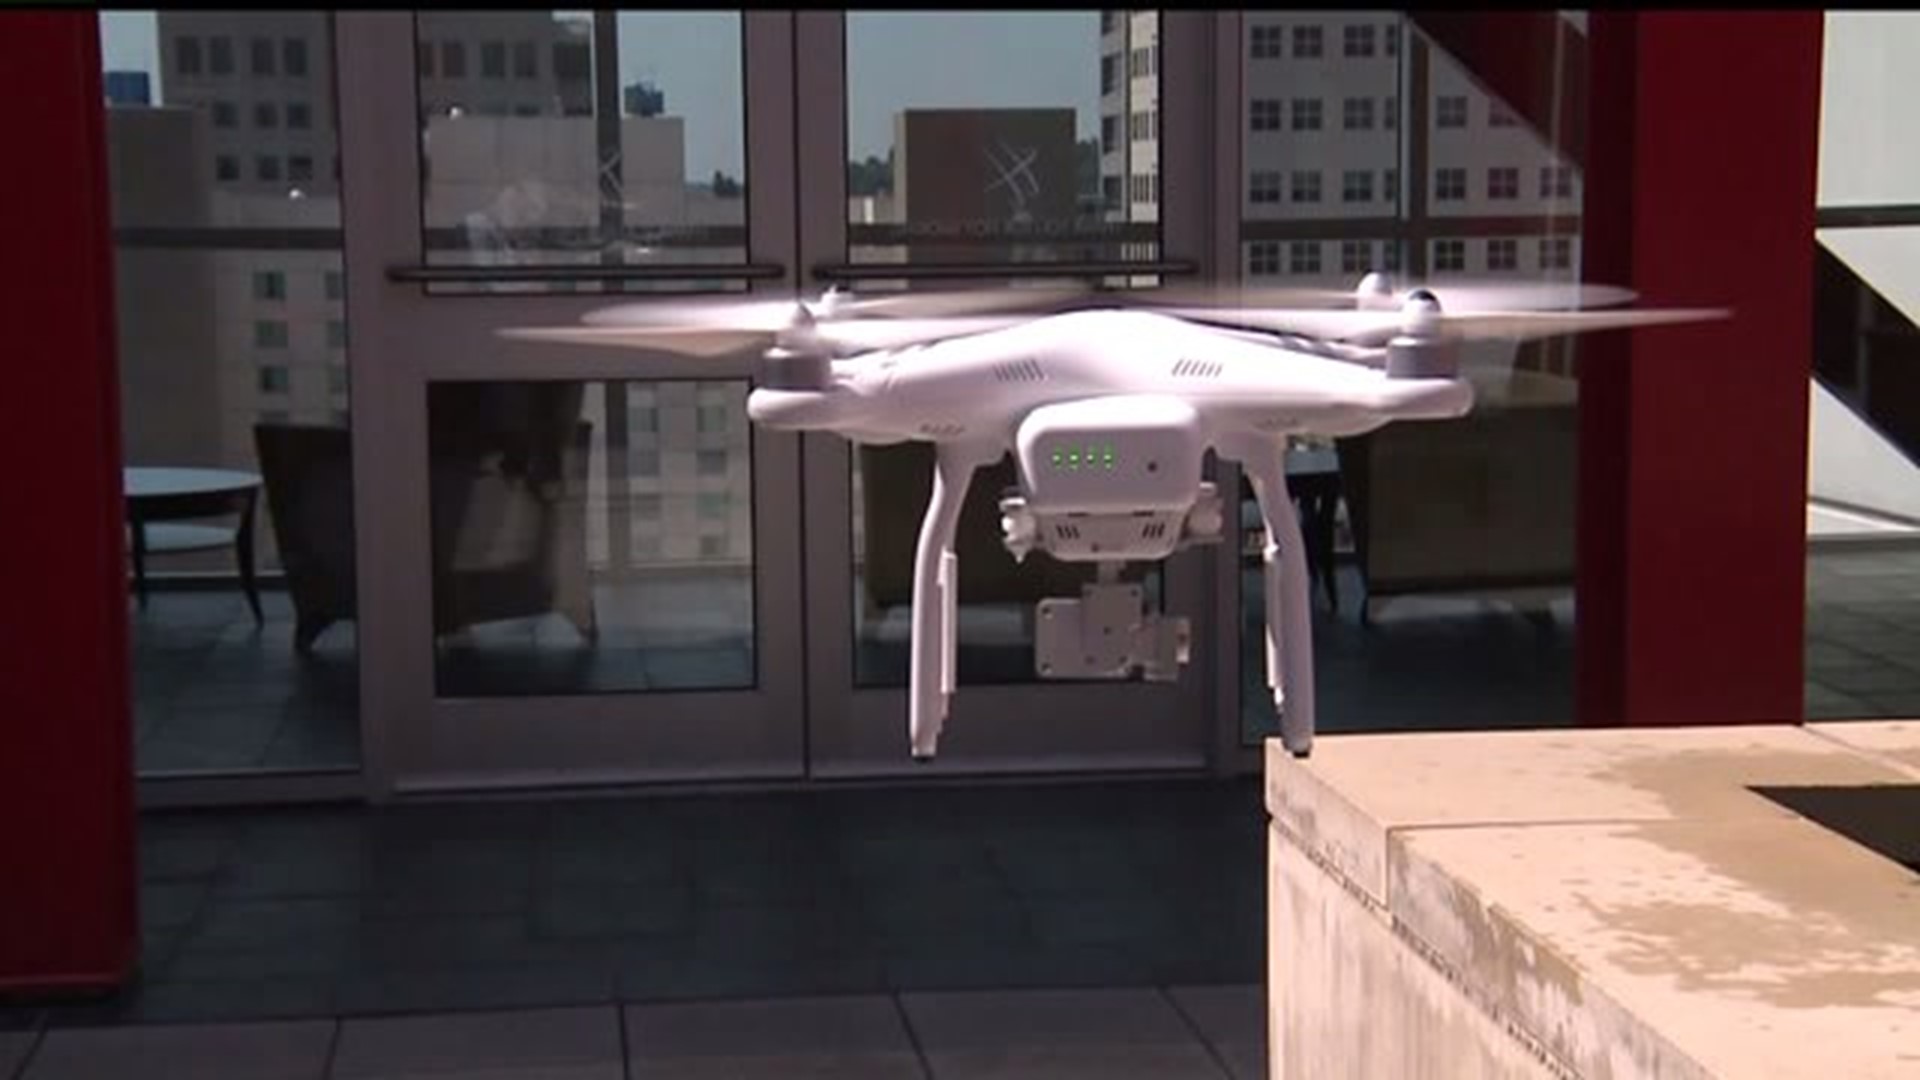 New federal laws going into effect may make flying drones easier for businesses